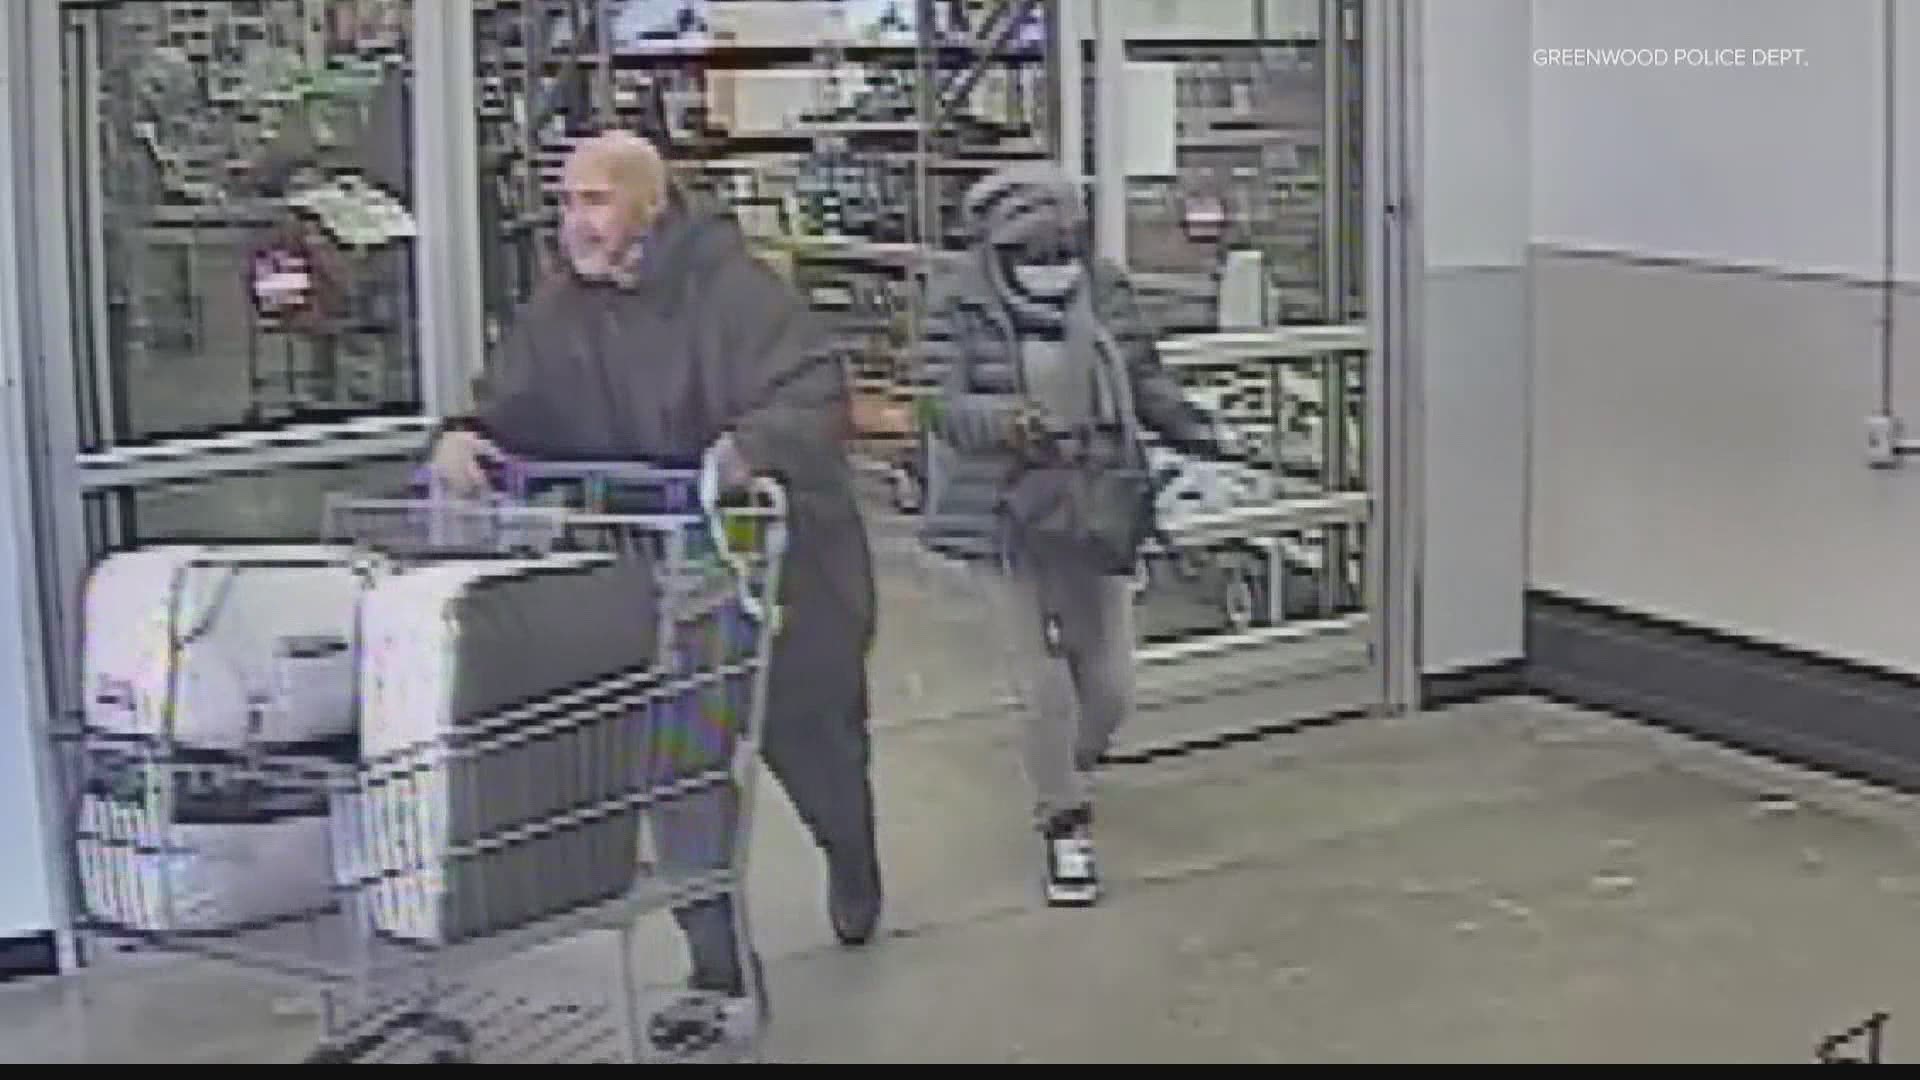 Police say thieves are targeting older shoppers in Greenwood.